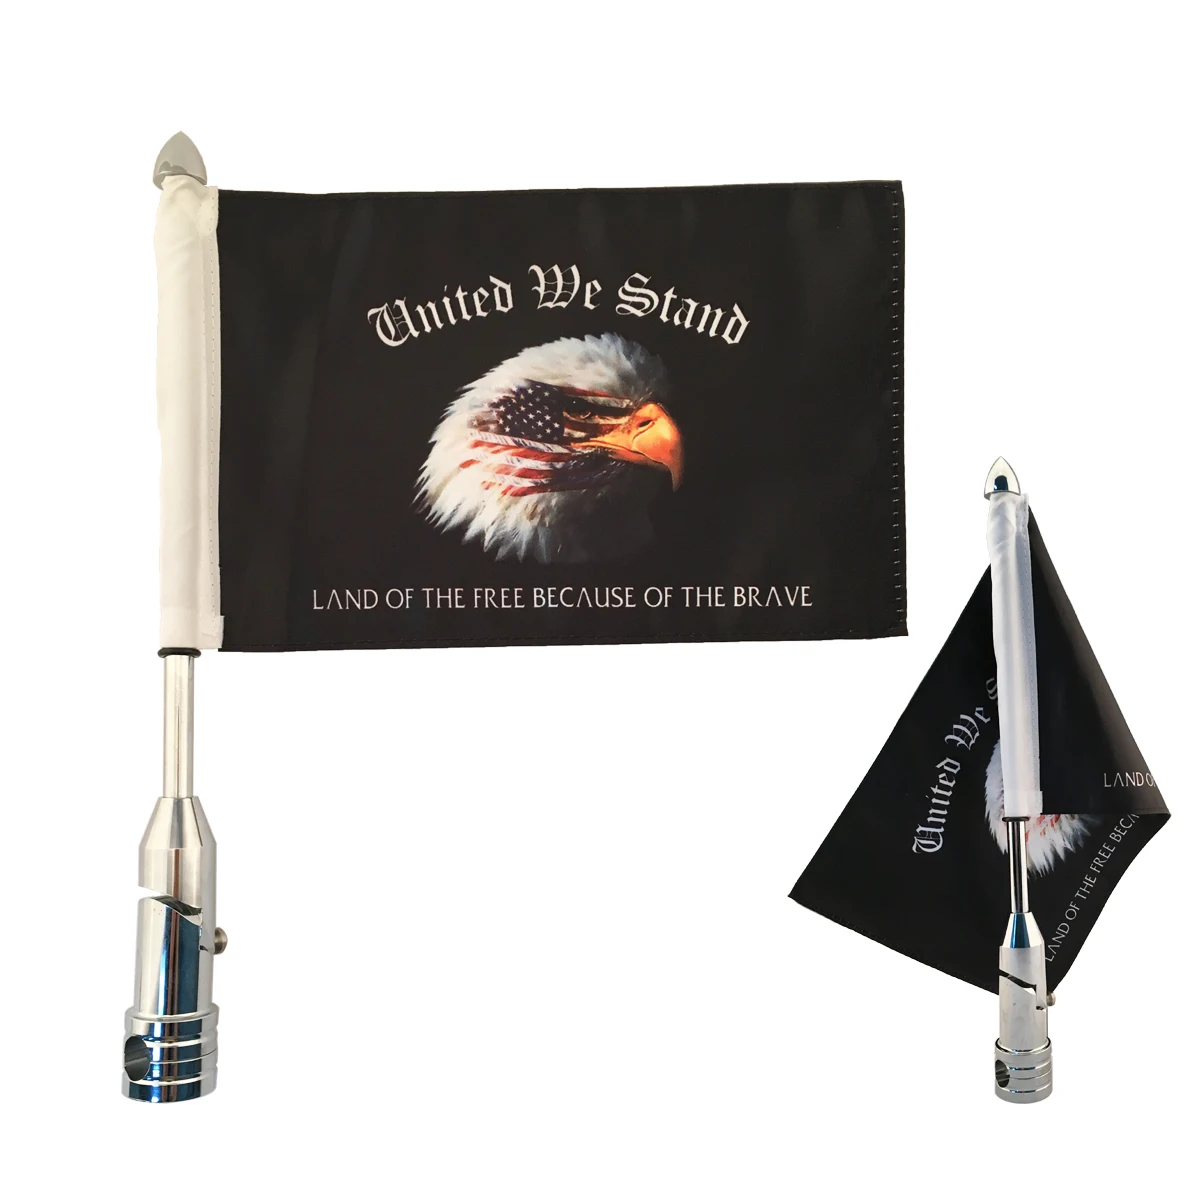 

Universal Adjustable Motorcycle Rear Side Mount Flag Pole 6 x 9 Inch Polyester 8 Countries Flags for Most Motorbike